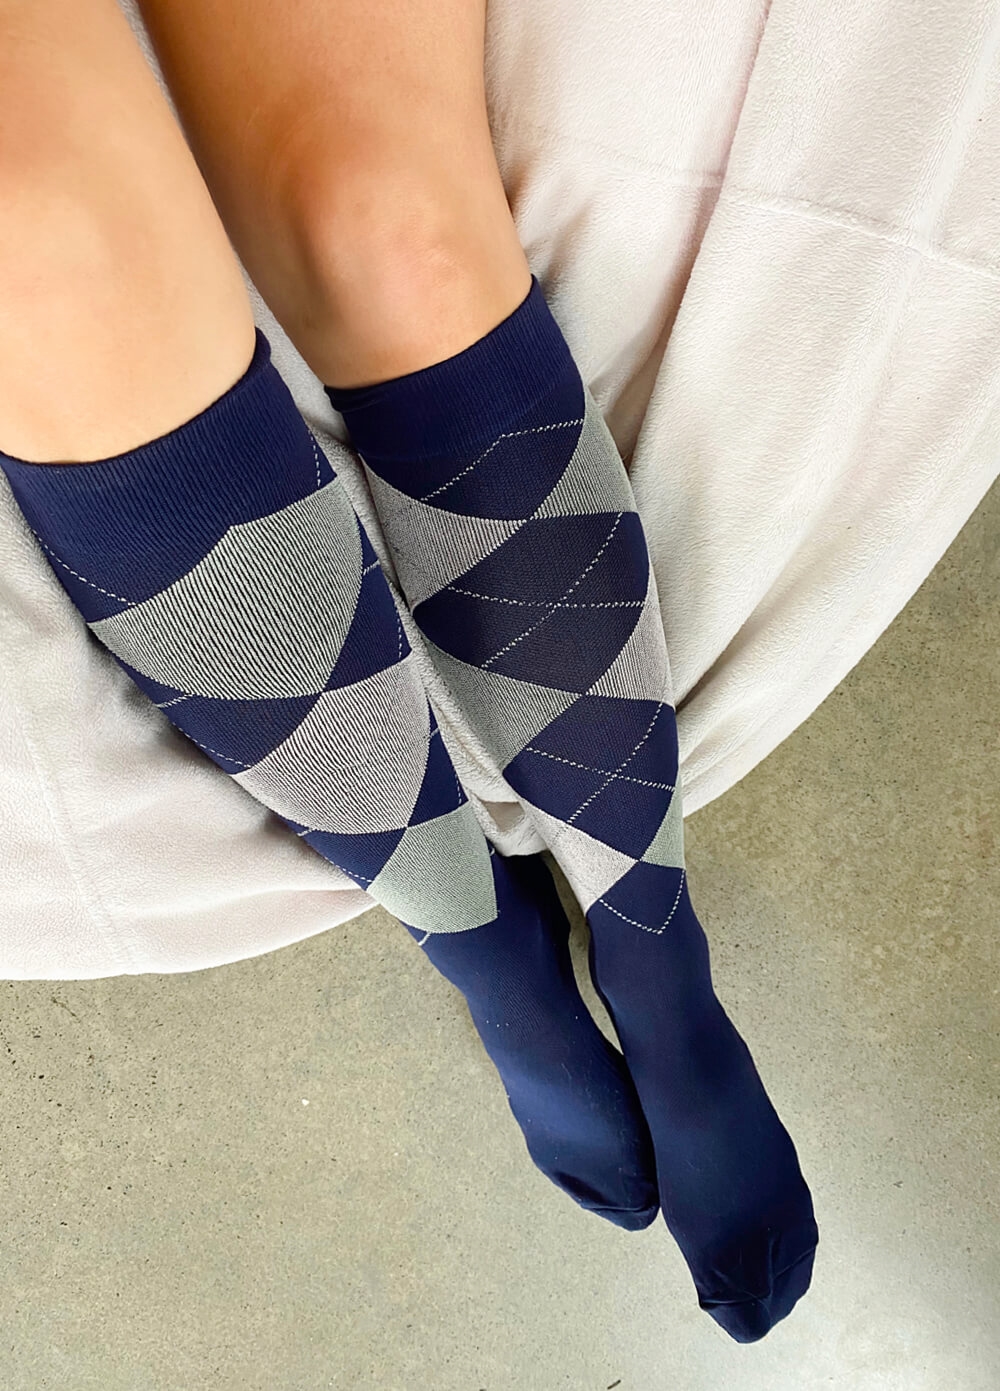 Mama Sox - Excite Maternity Compression Socks in Navy Argyle